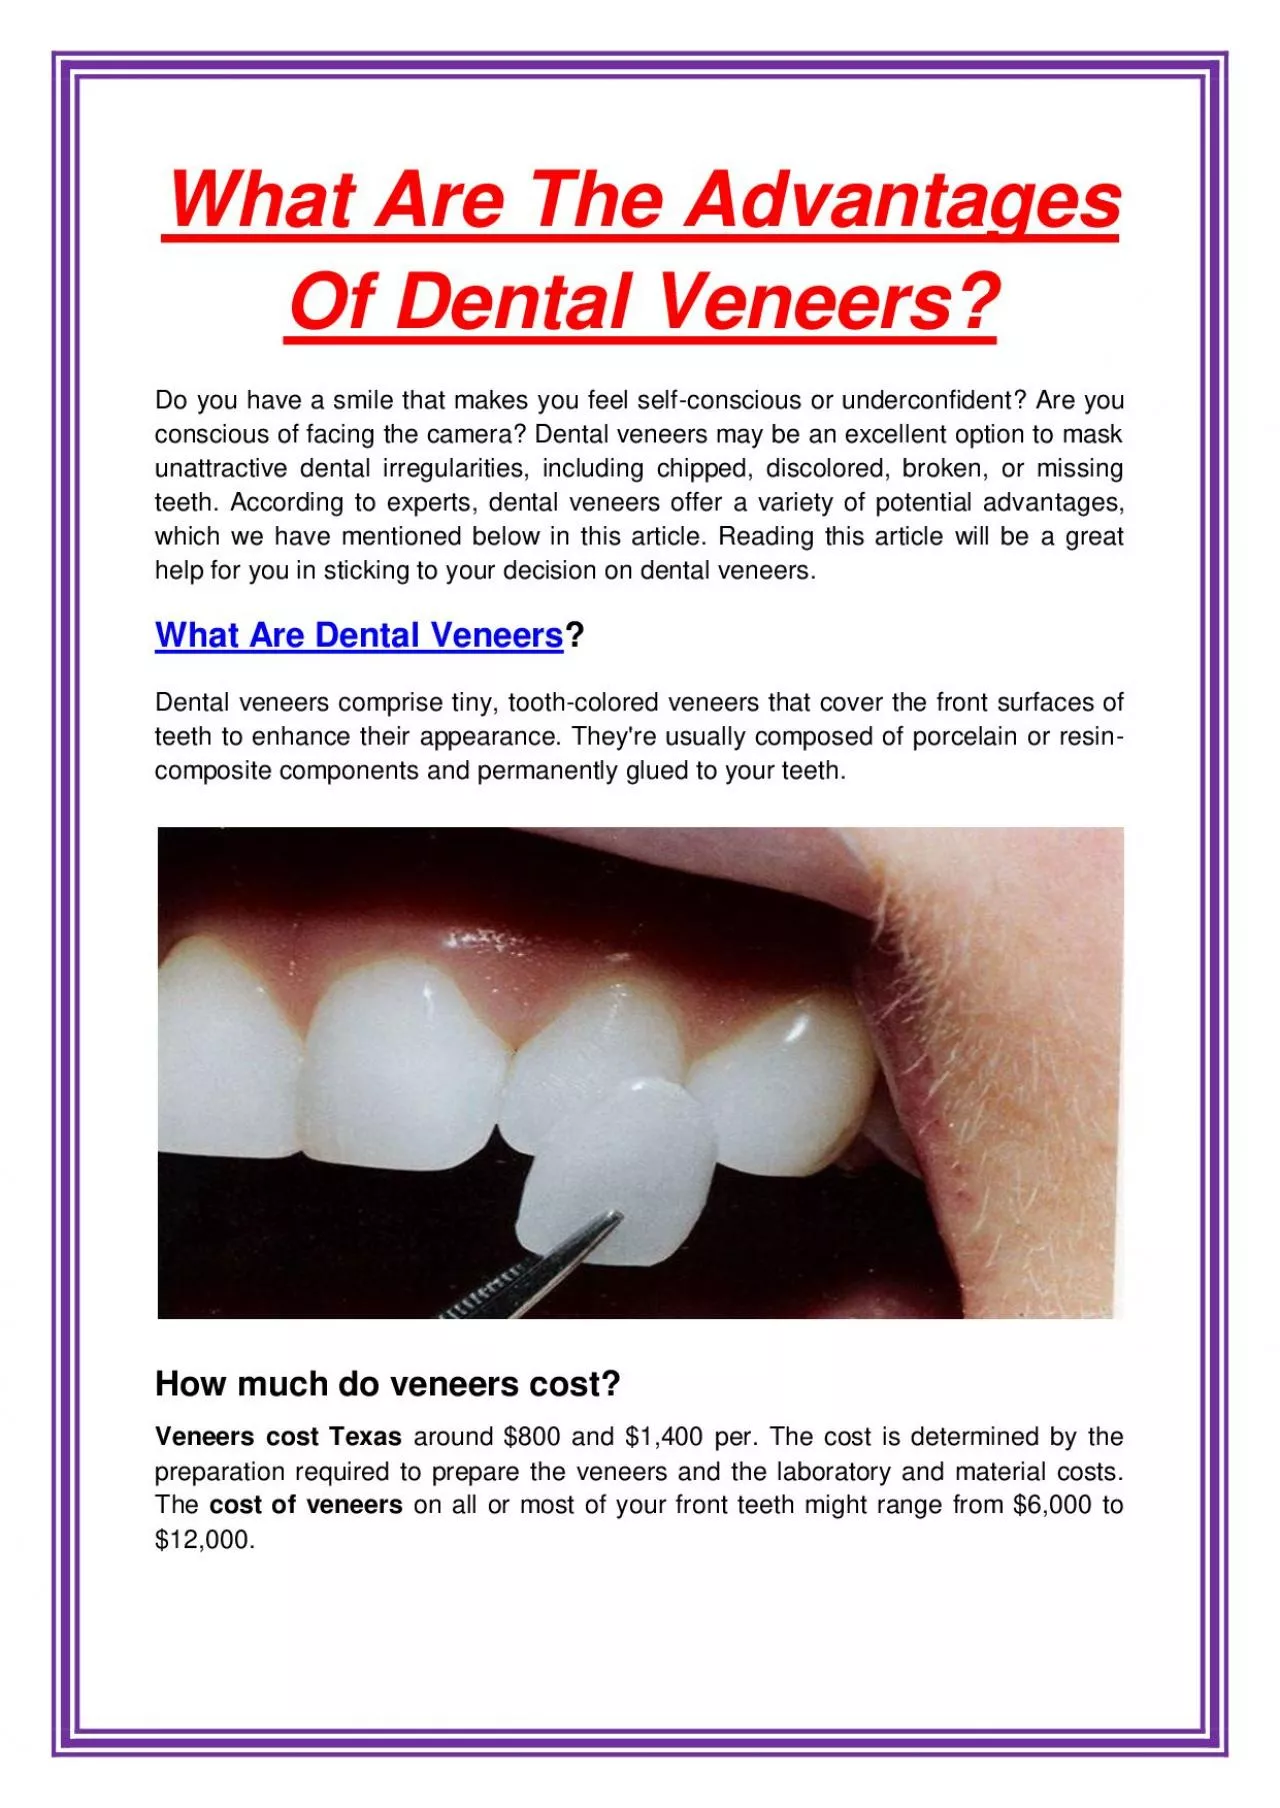 What Are The Advantages Of Dental Veneers?